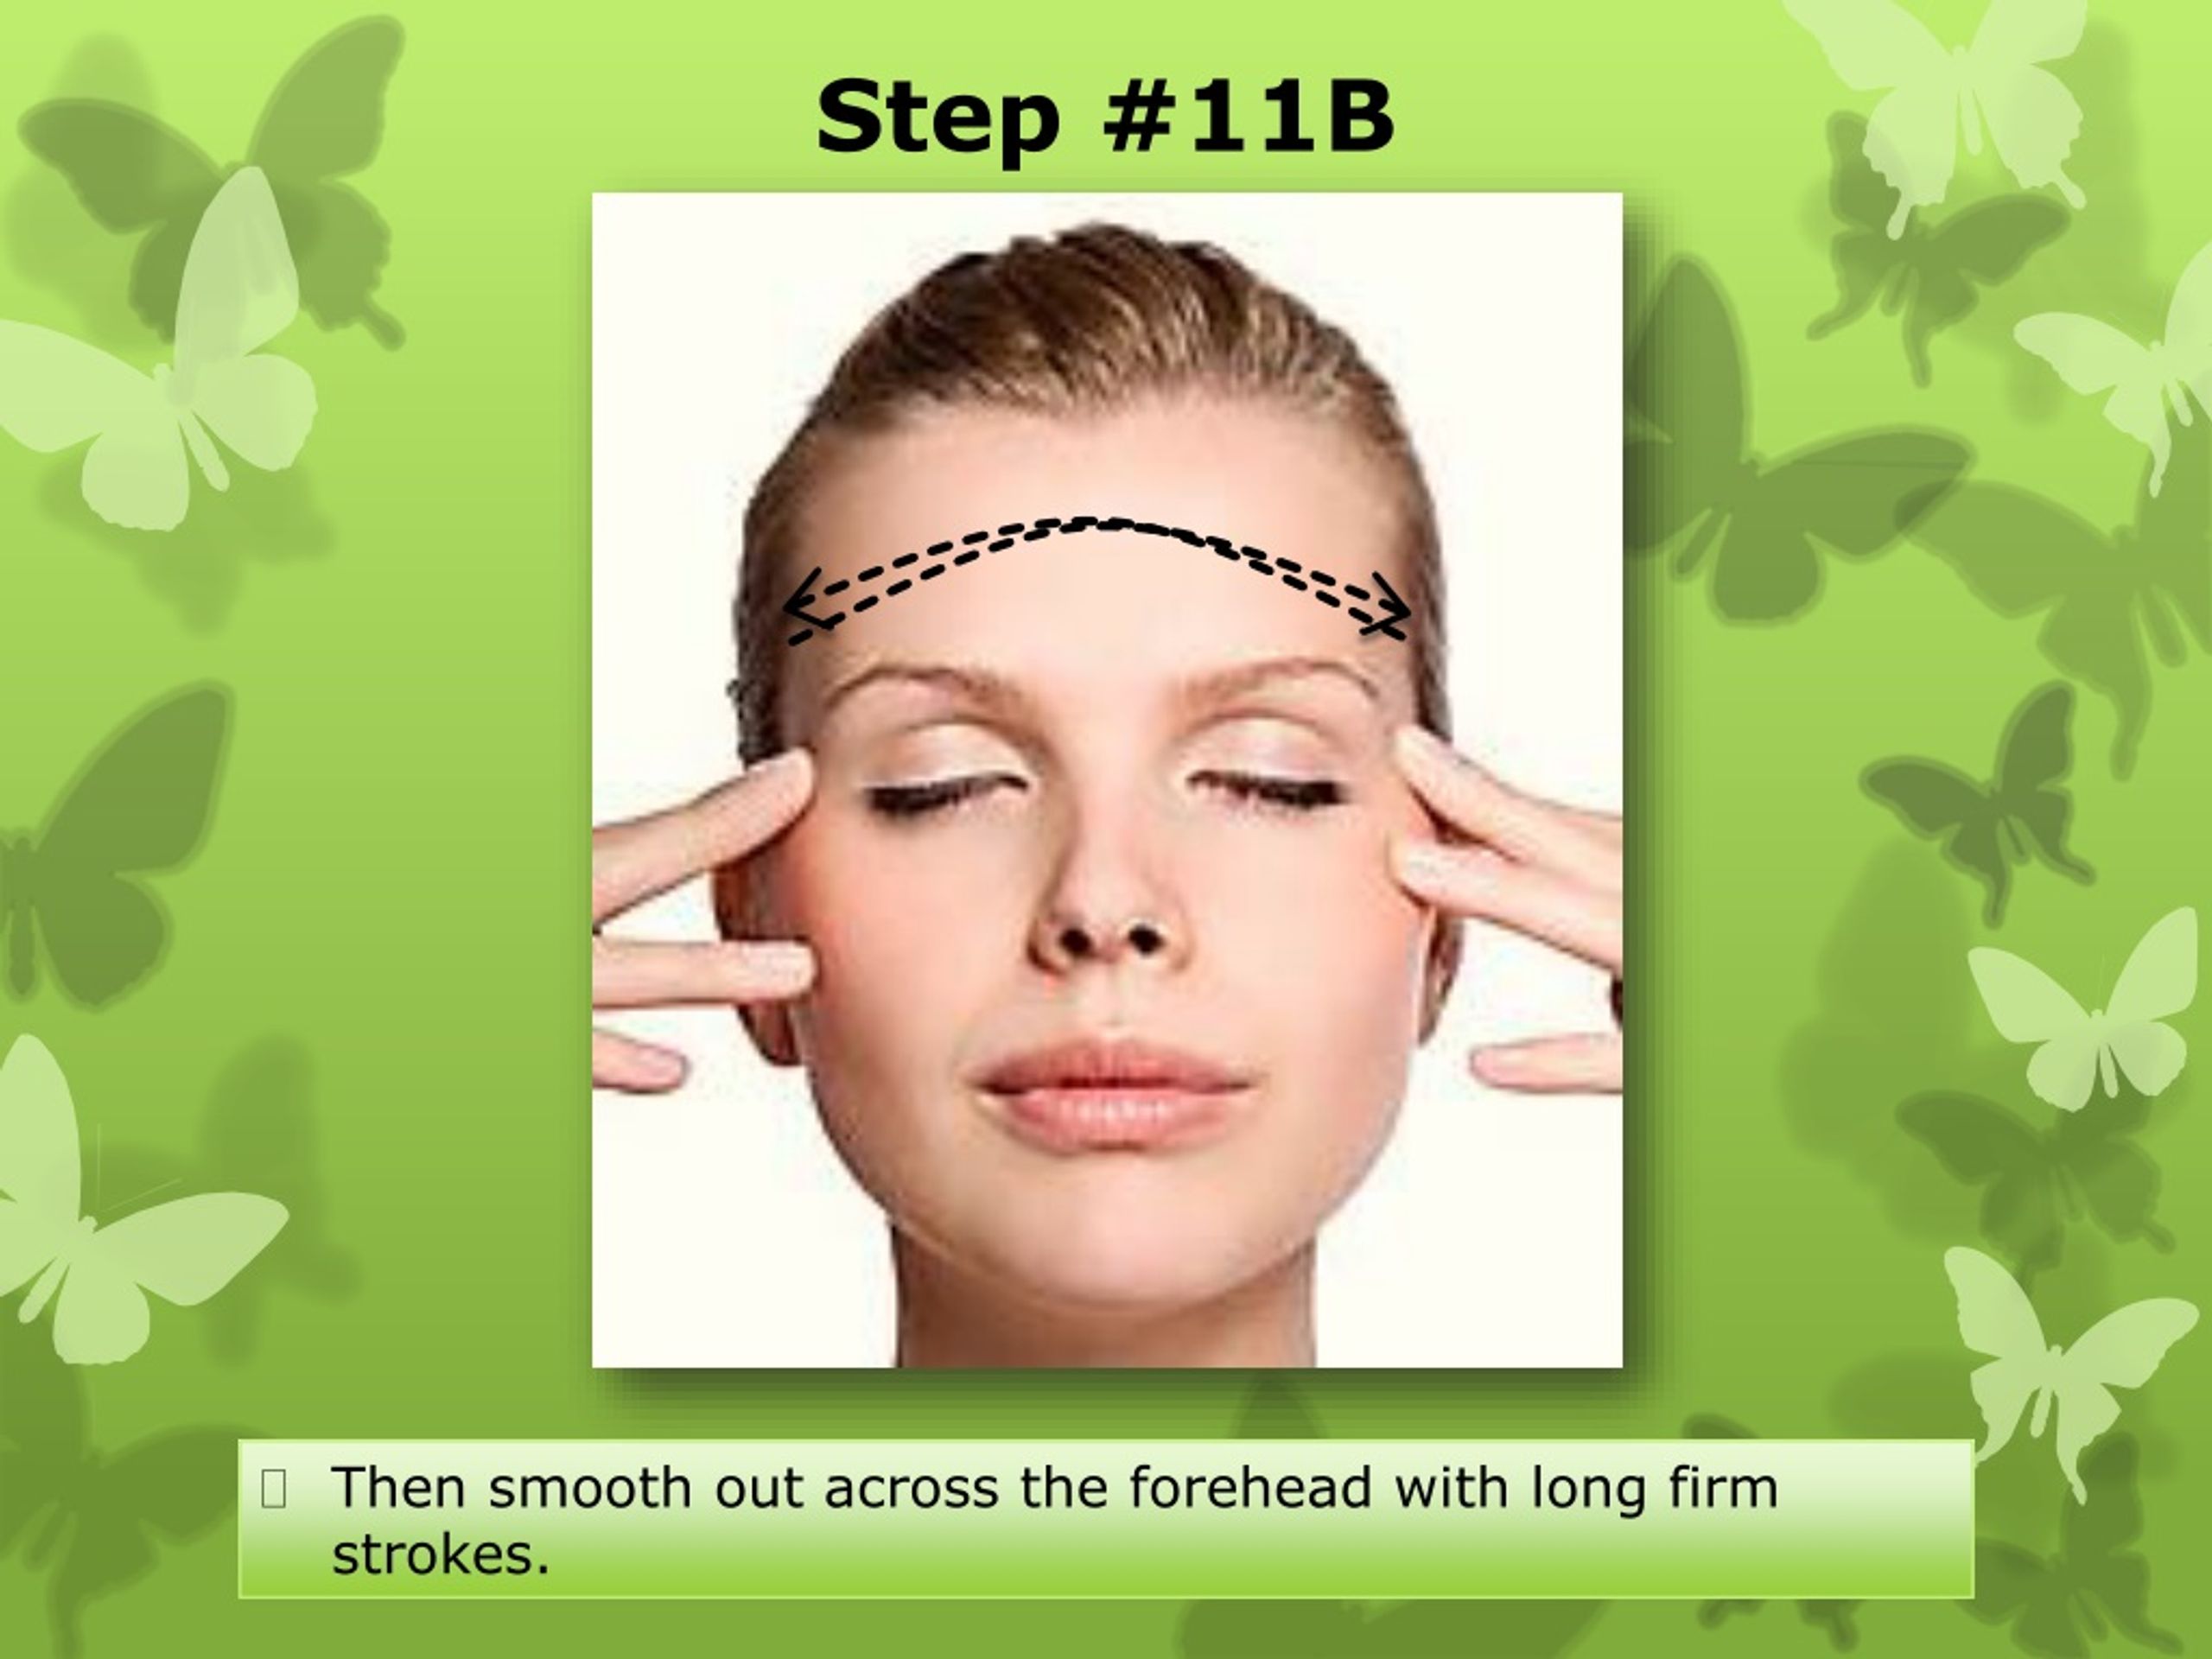 Ppt Face And Scalp Massage Powerpoint Presentation Free Download Id9005683